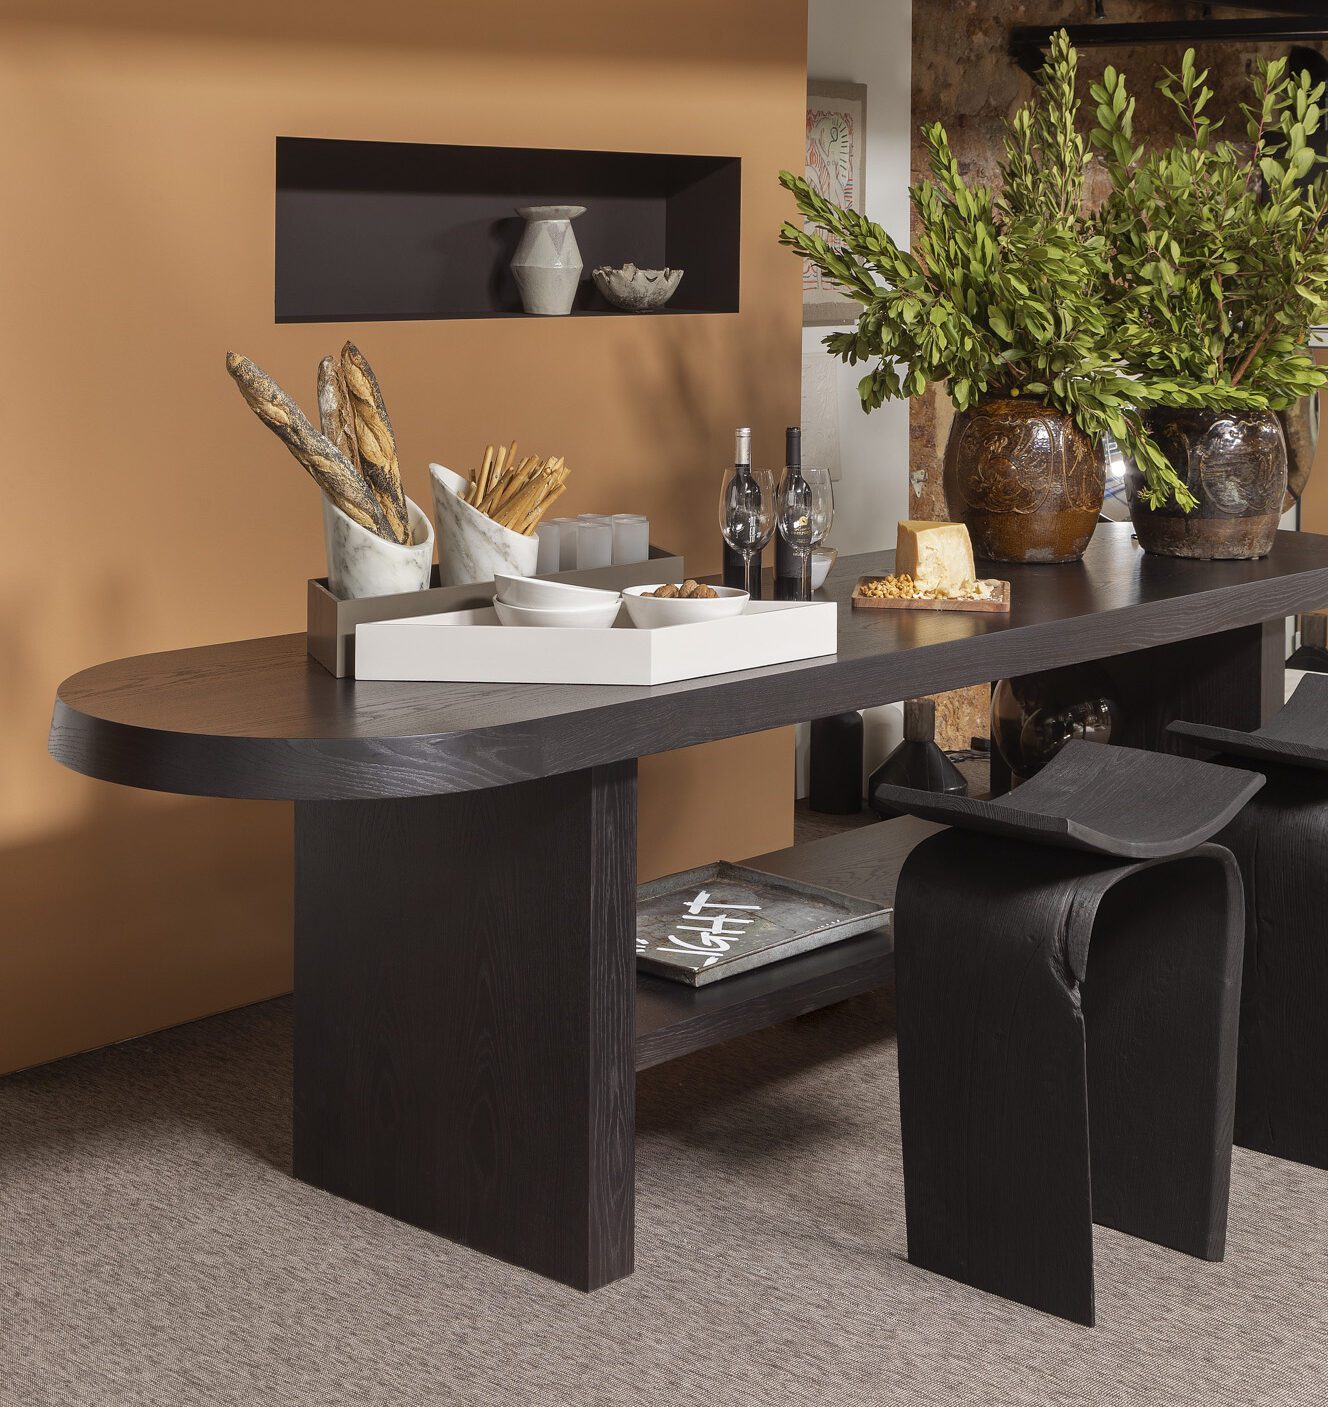 SAV black oak table interior design architecture product furniture luxury texture natural matte polish permeability 8 cm thickness top special piece personality charcoal